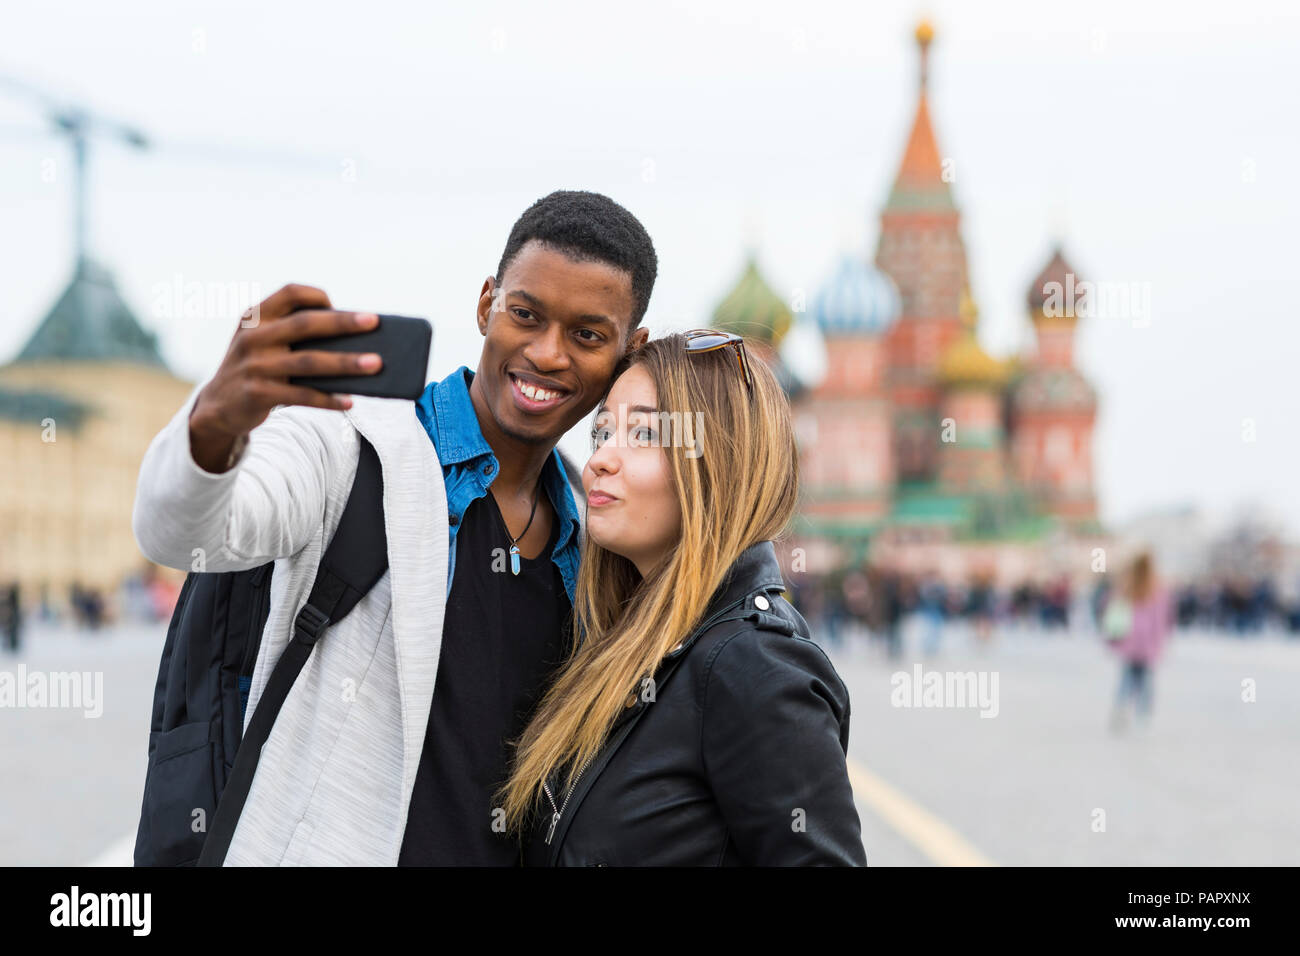 russia-moscow-couple-taking-a-selfie-and-smiling-PAPXNX.jpg